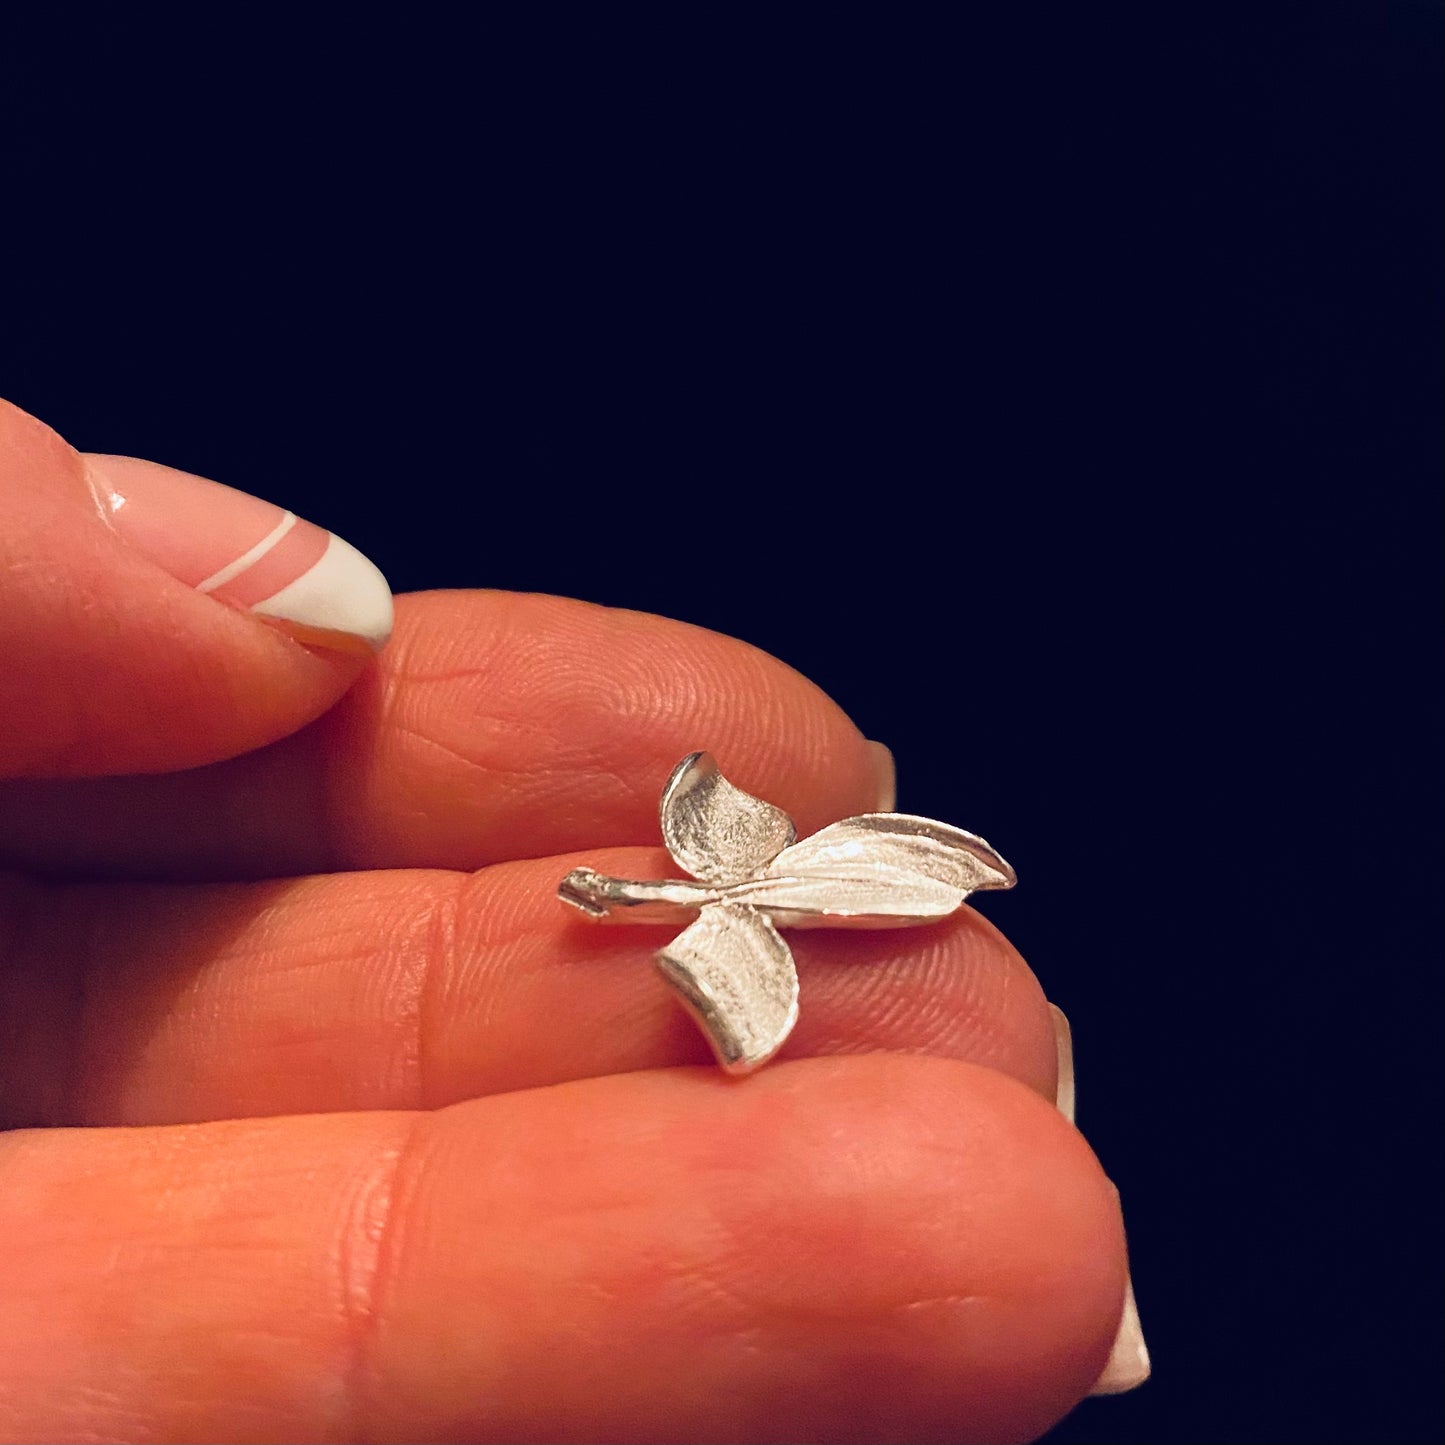 3 Leaf Casting for Jewelry Design